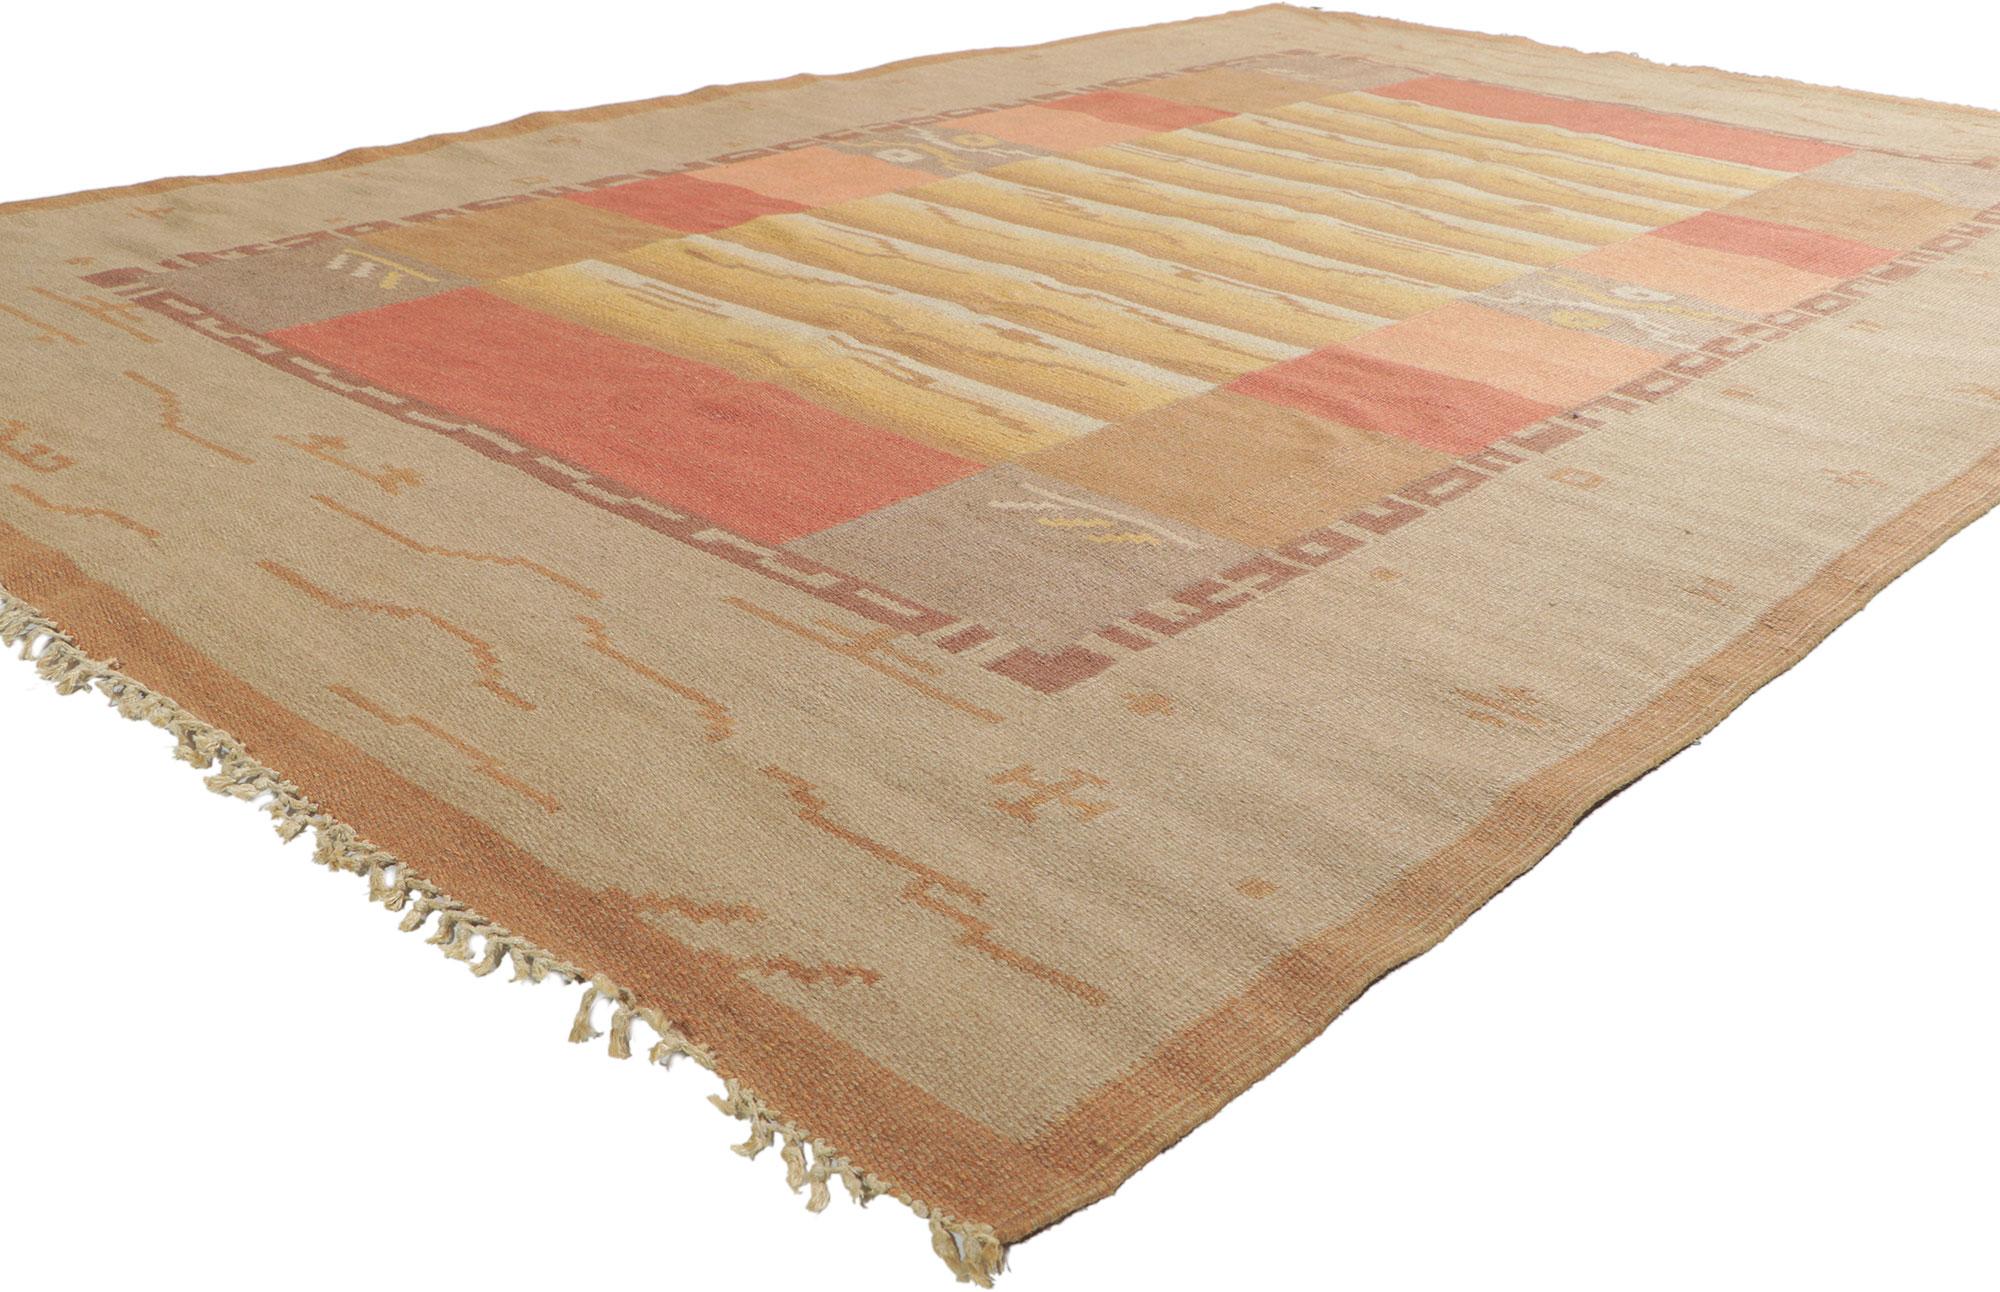 78477 Vintage Finnish Flatweave Rug, 06'04 x 09'10. Emanating autumn in Finland with incredible detail and texture, this handwoven Finnish flatweave rug is a captivating vision of woven beauty. The eye-catching Biophilic Design and earthy colorway